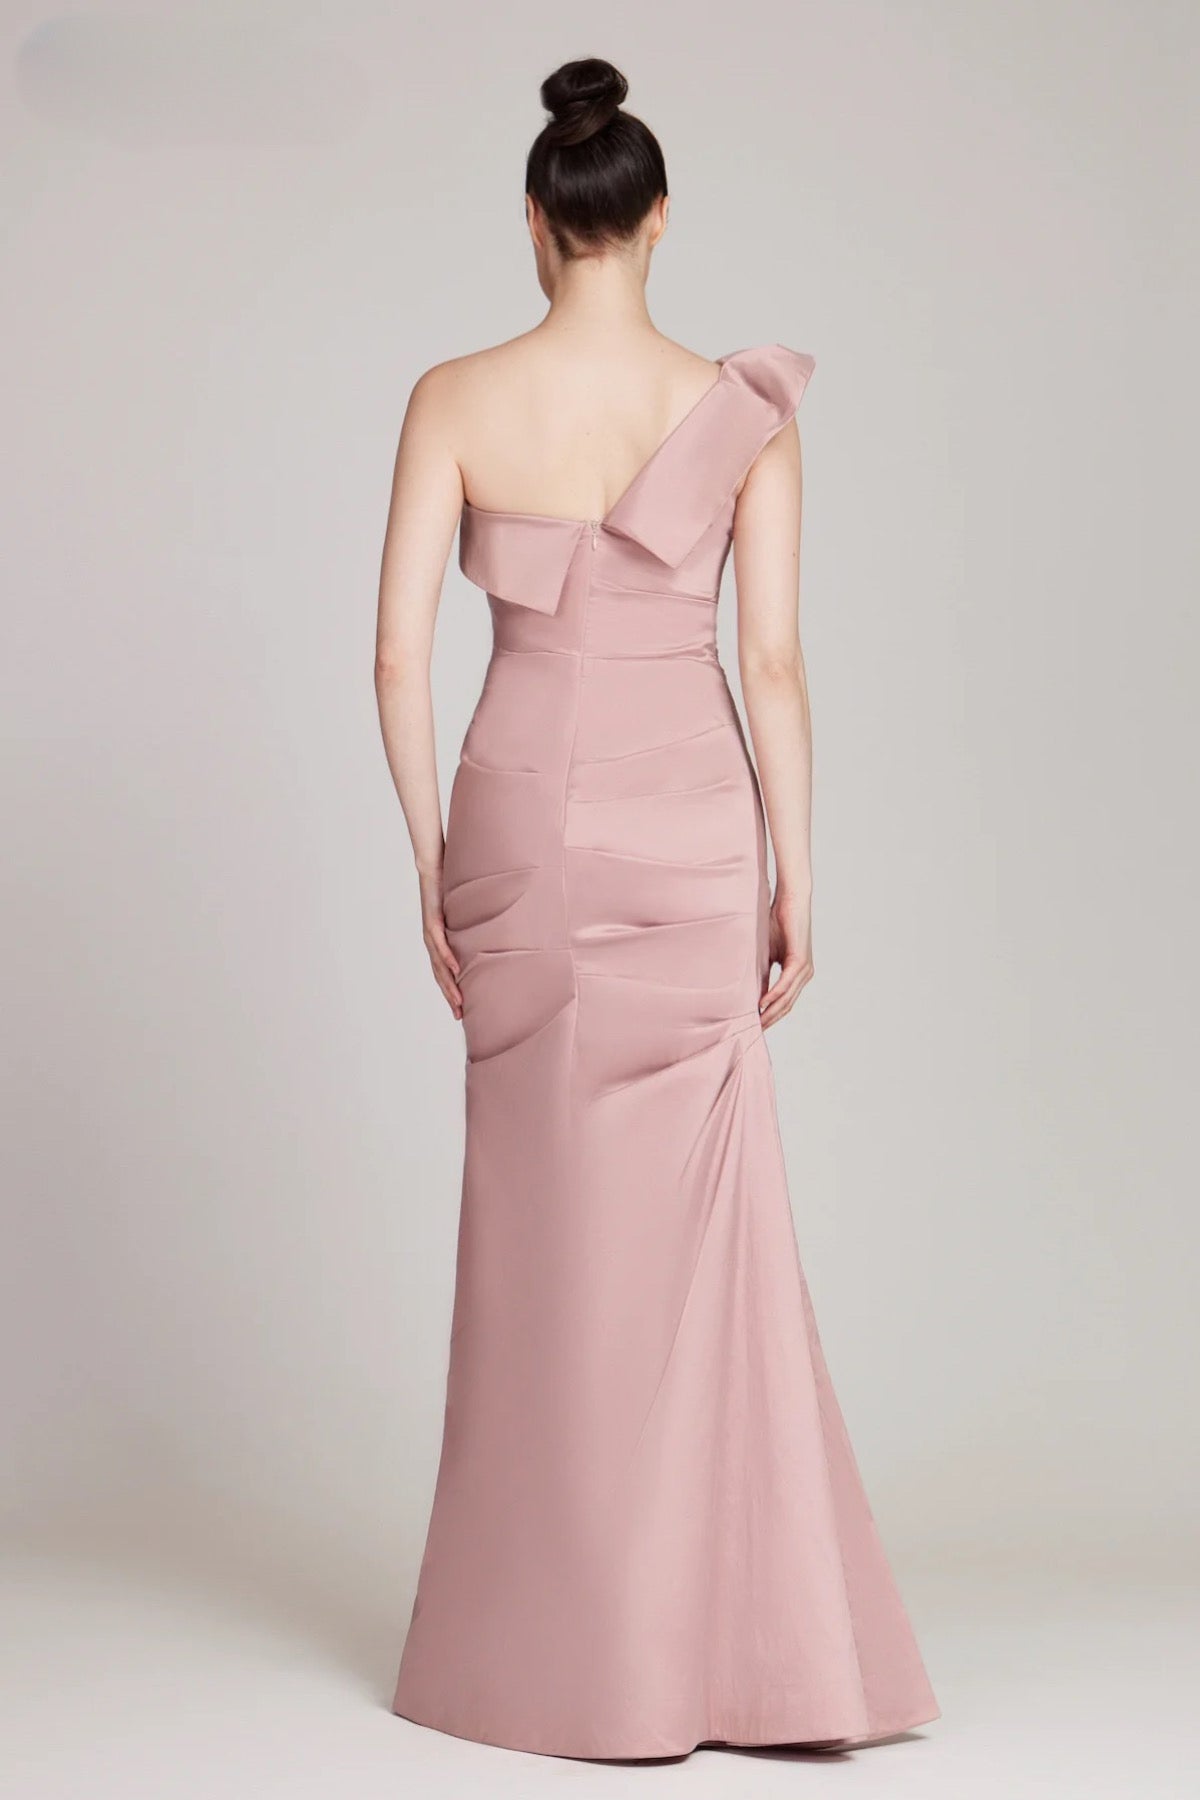 A stunning floor-length taffeta gown by Teri Jon, featuring a one-shoulder design with draped detailing, perfect for mother of the bride or groom occasions, black tie parties, and galas. Available at Madeline's Boutique in Toronto and Boca Raton.  Picture is of model wearing the dress in blush color.  Back of Dress view.